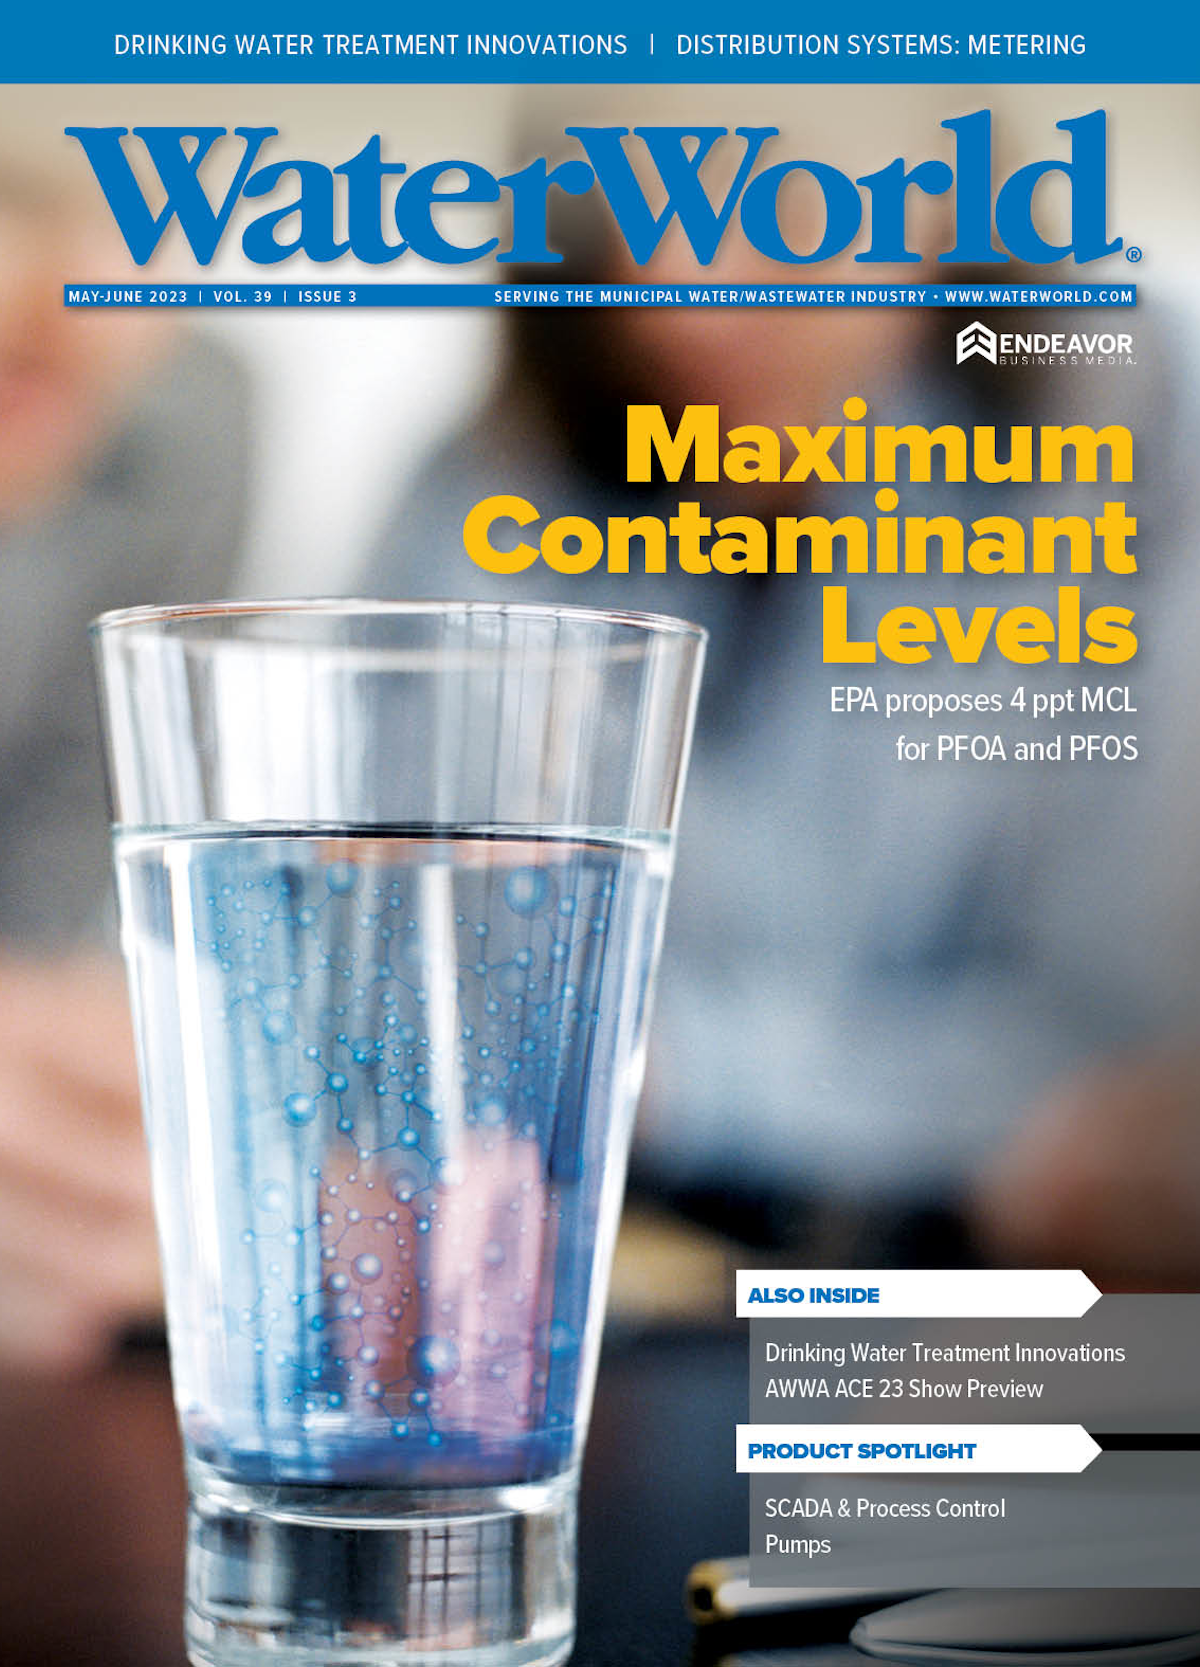 Volume 39, Issue 3, May/June 2023 cover image